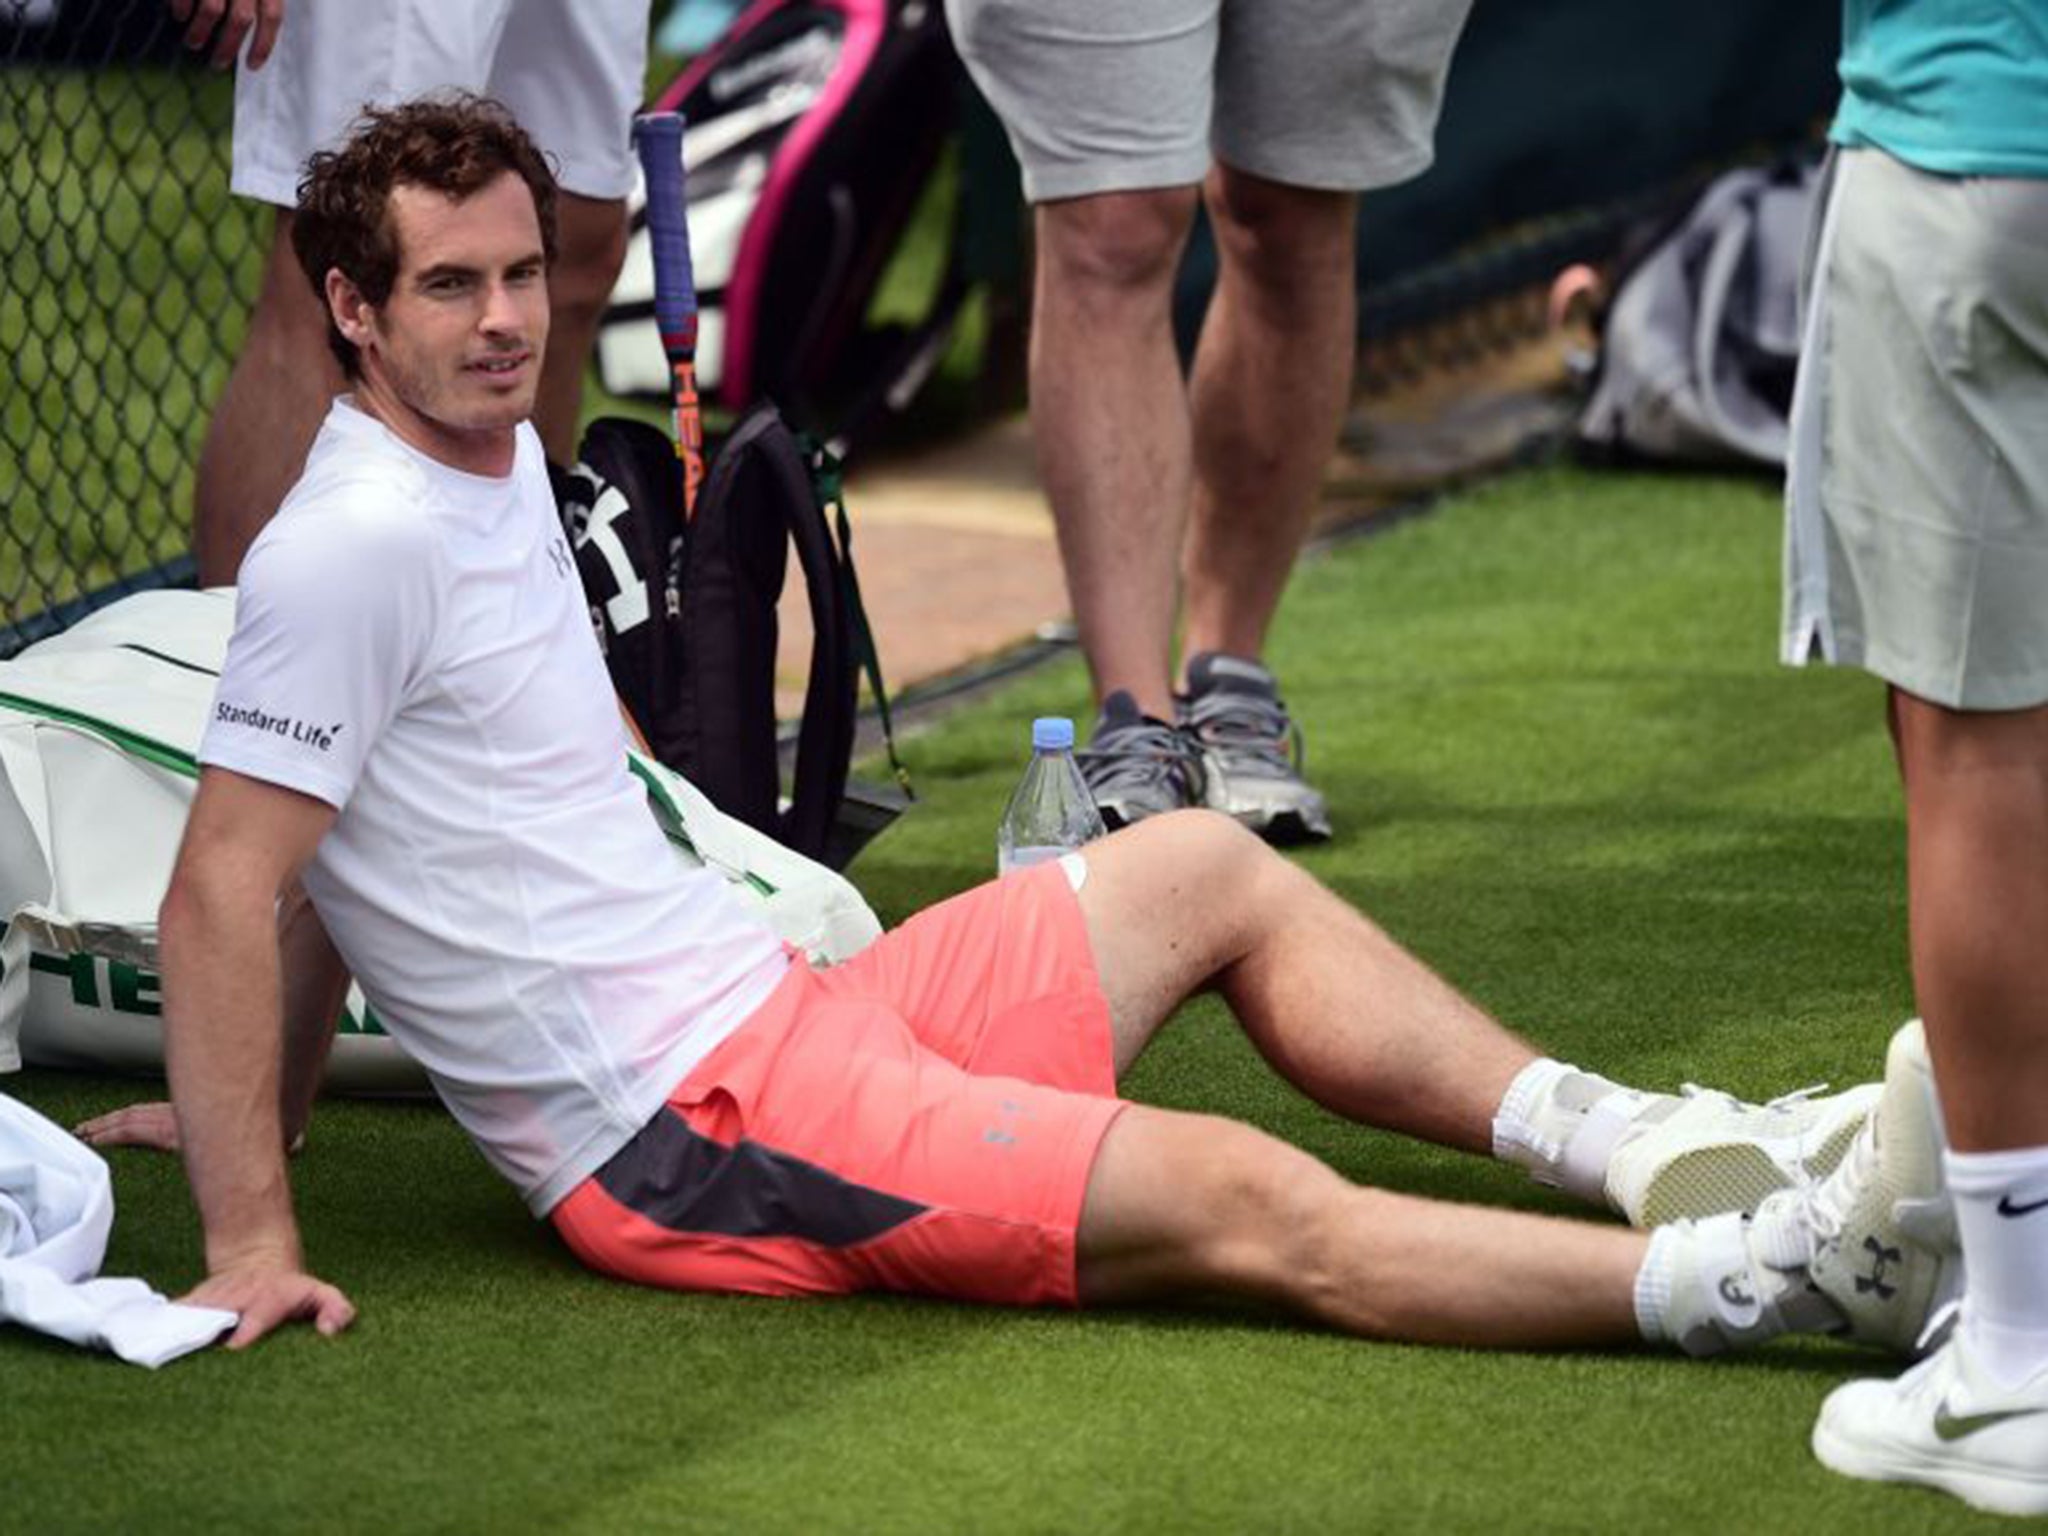 Andy Murray relaxing during a practice session ahead of Wimbledon